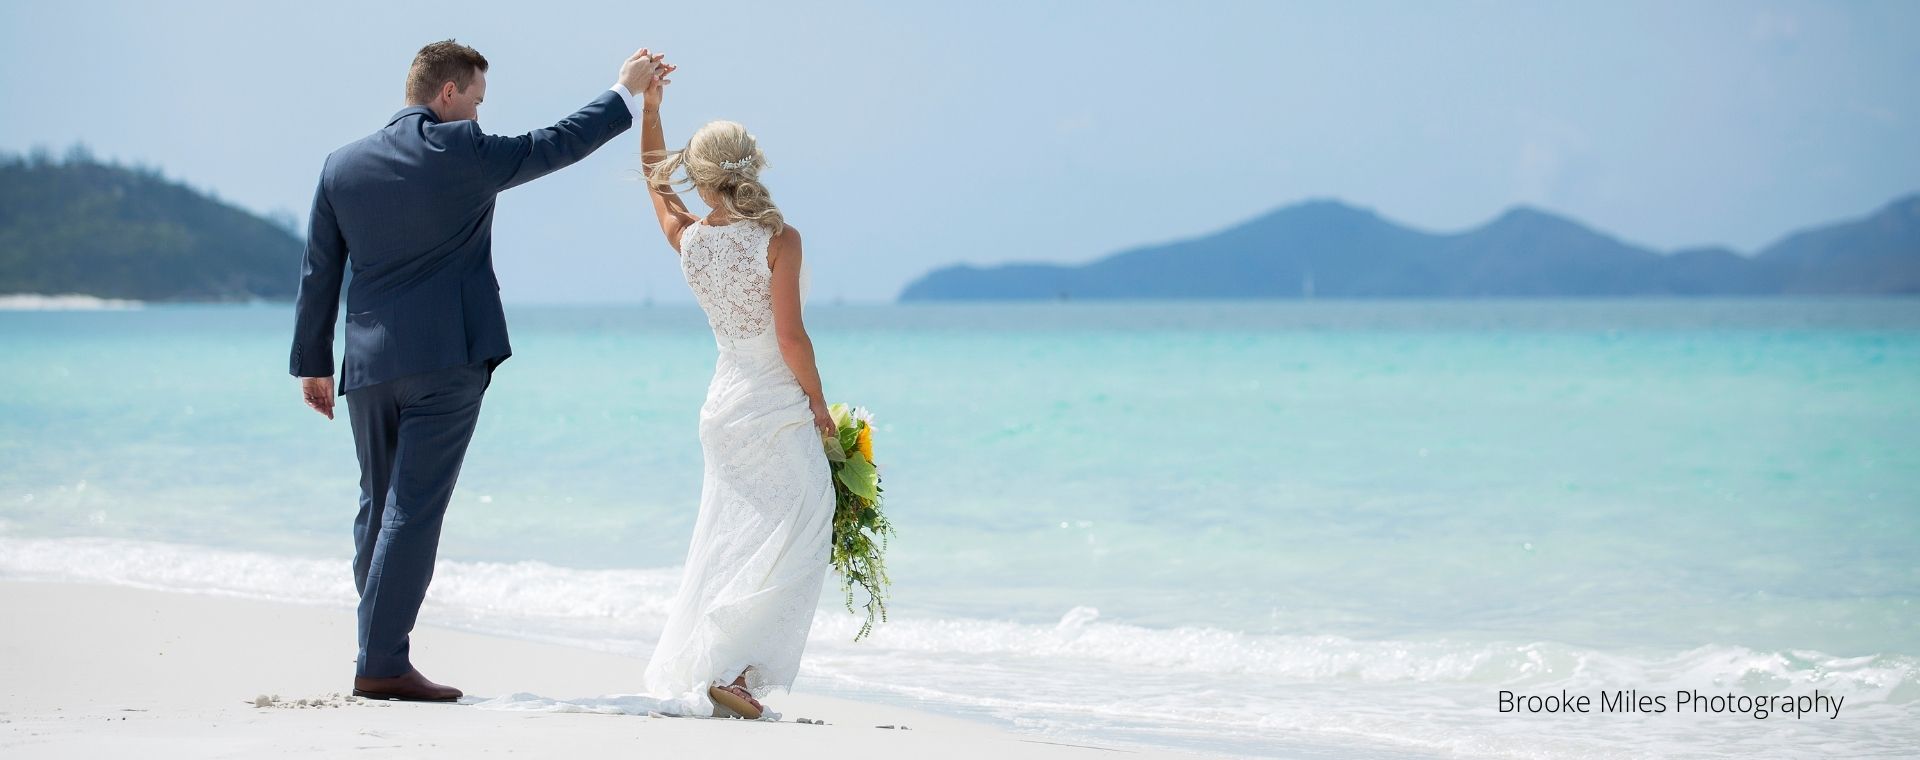 Bride and Groom dancing on a white beach